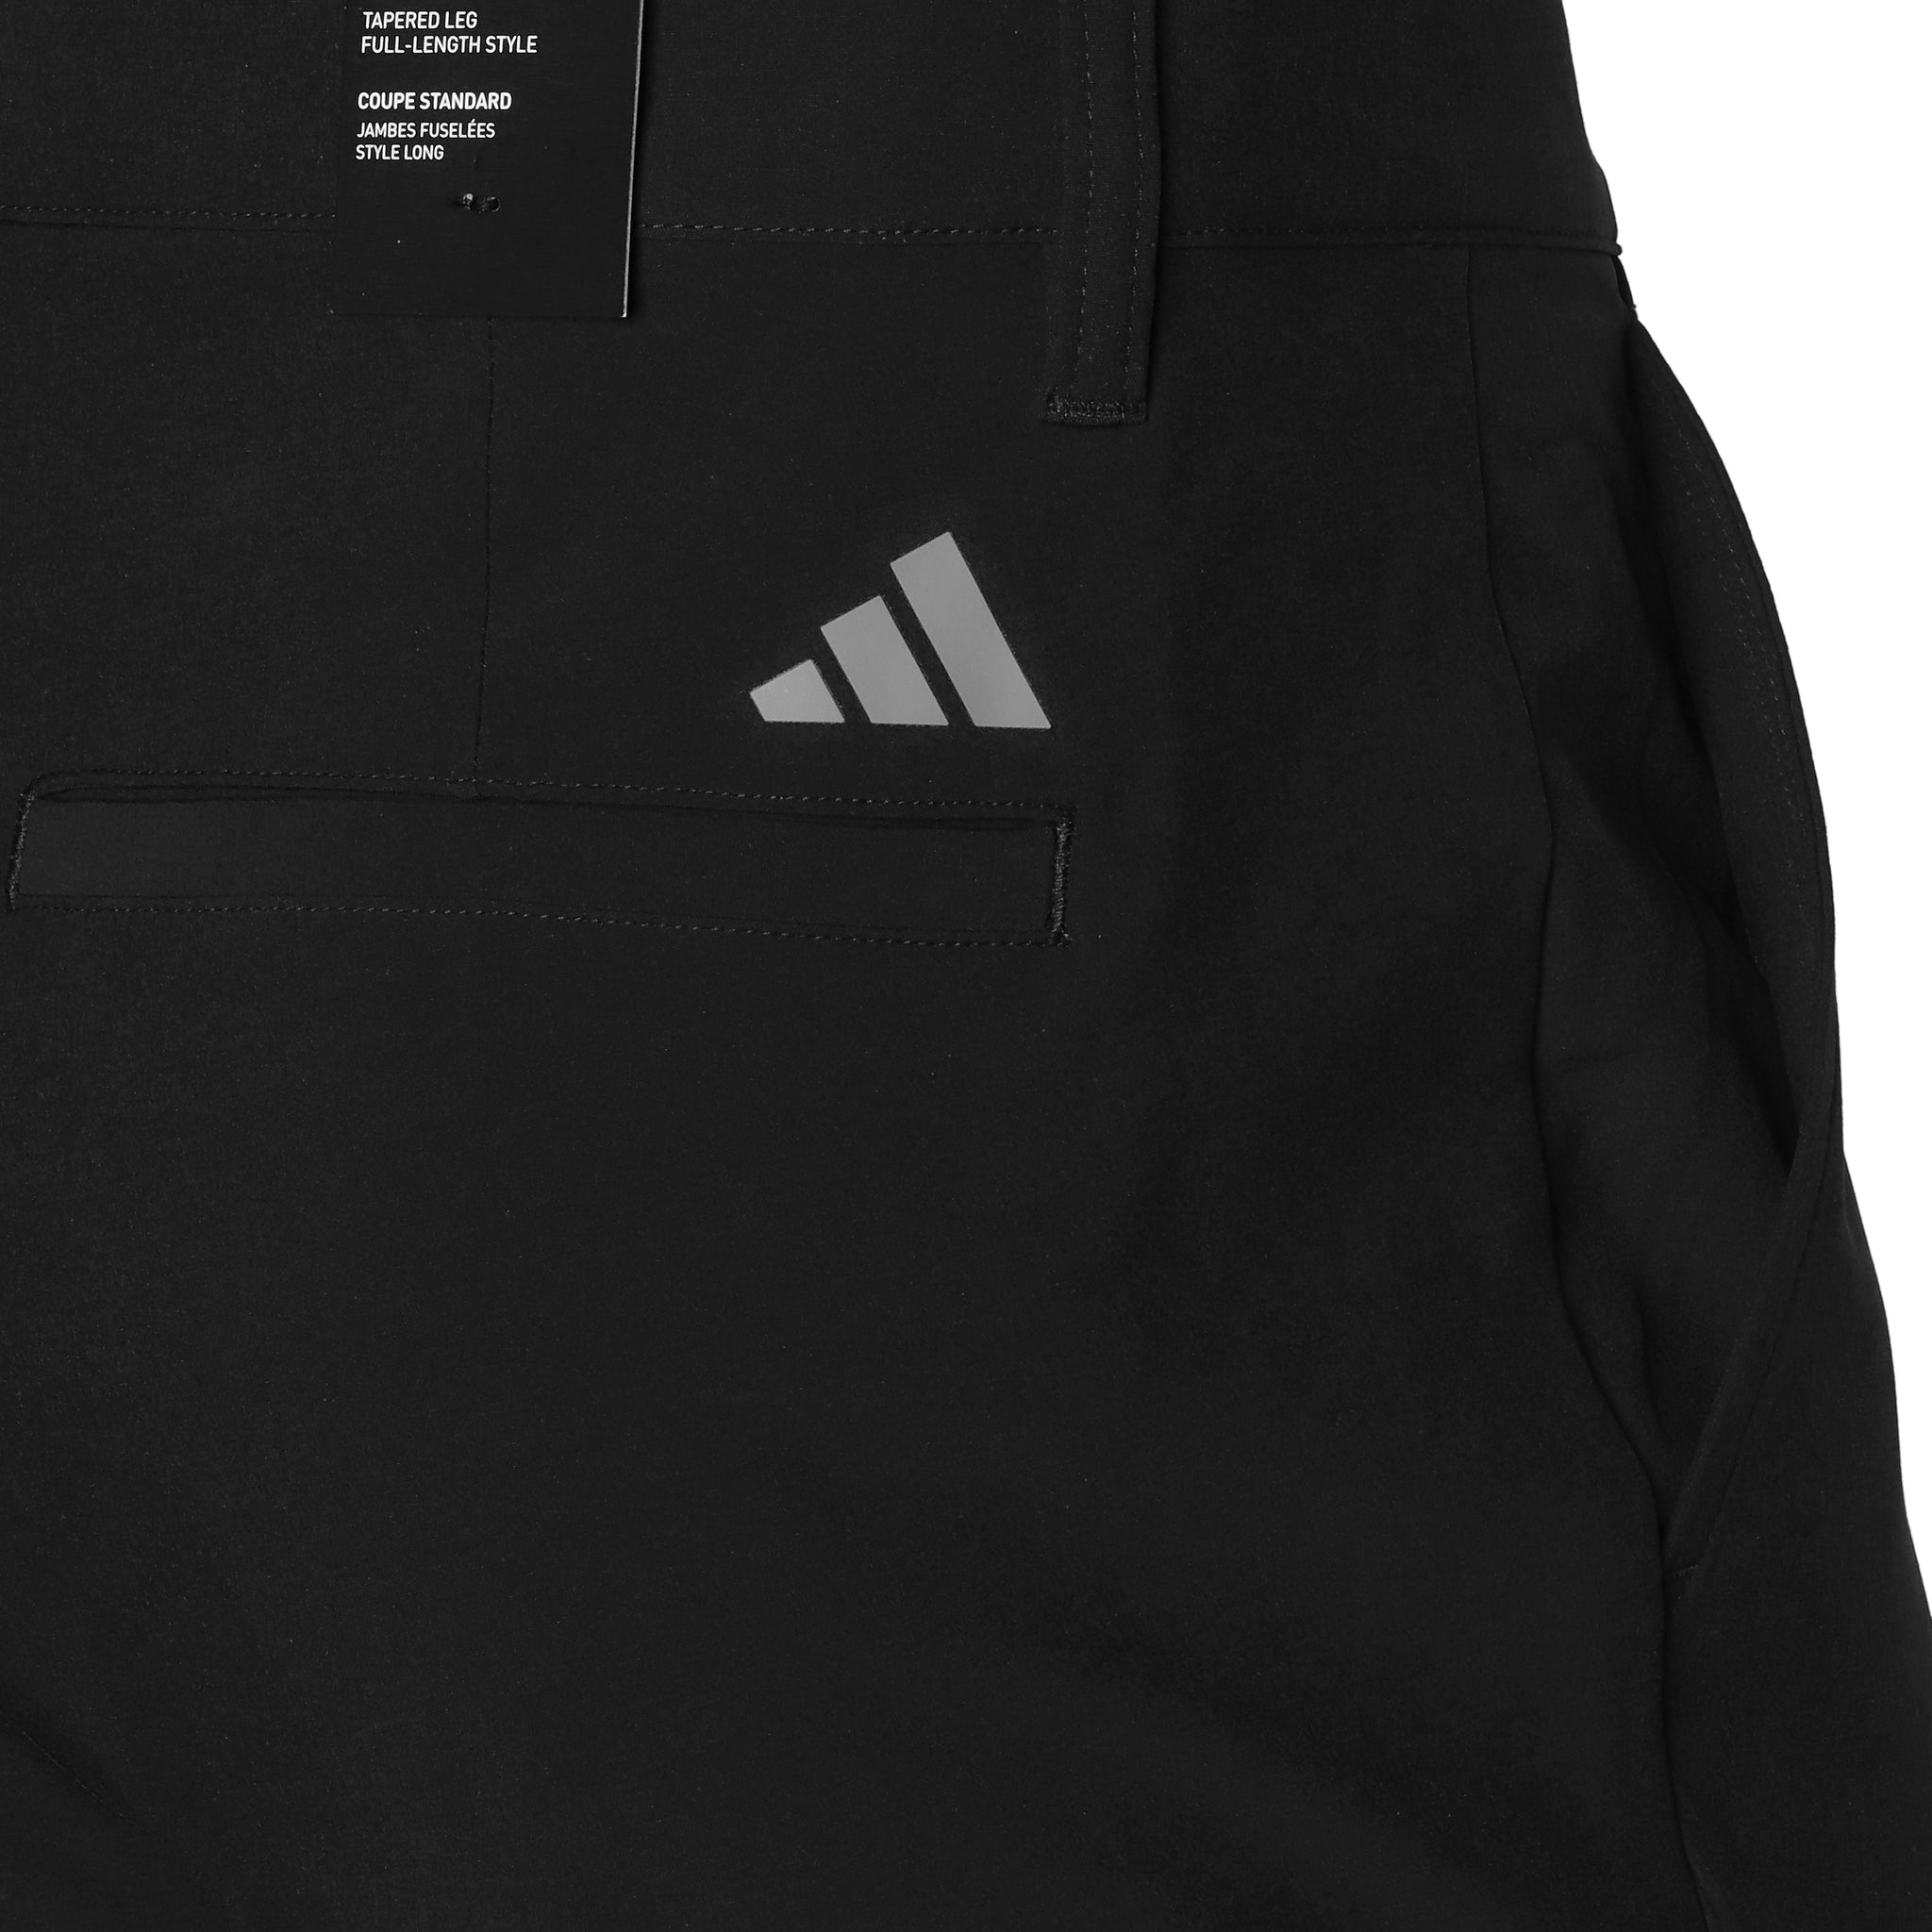 adidas-golf-ultimate365-tapered-pants-it7859-black